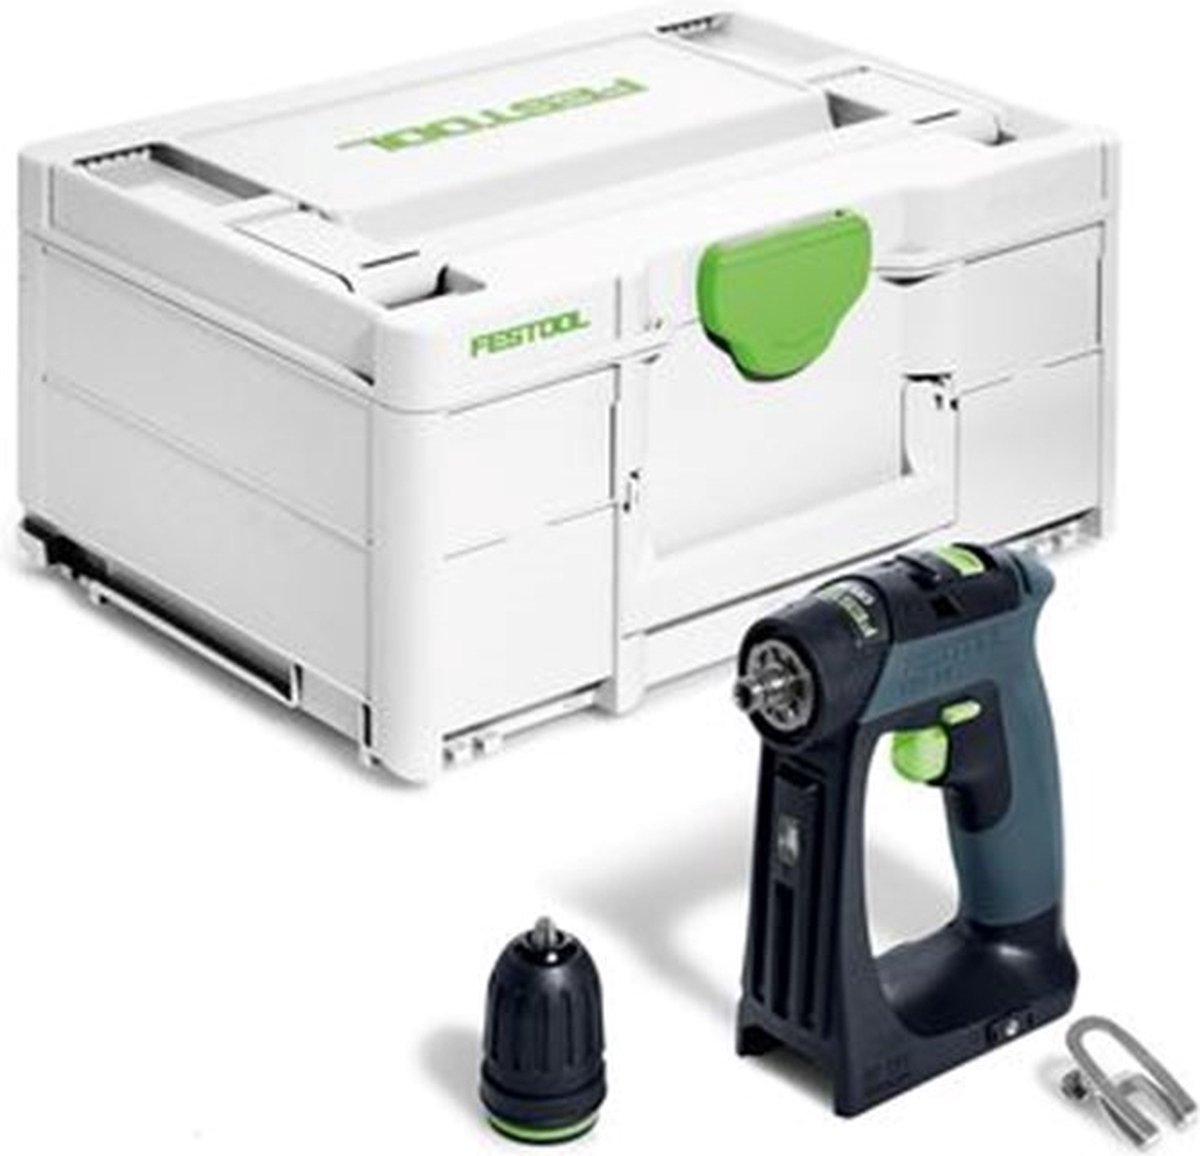 Festool CXS 18-Basic Accu Schroefboormachine 18V Basic Body in Systainer 576882